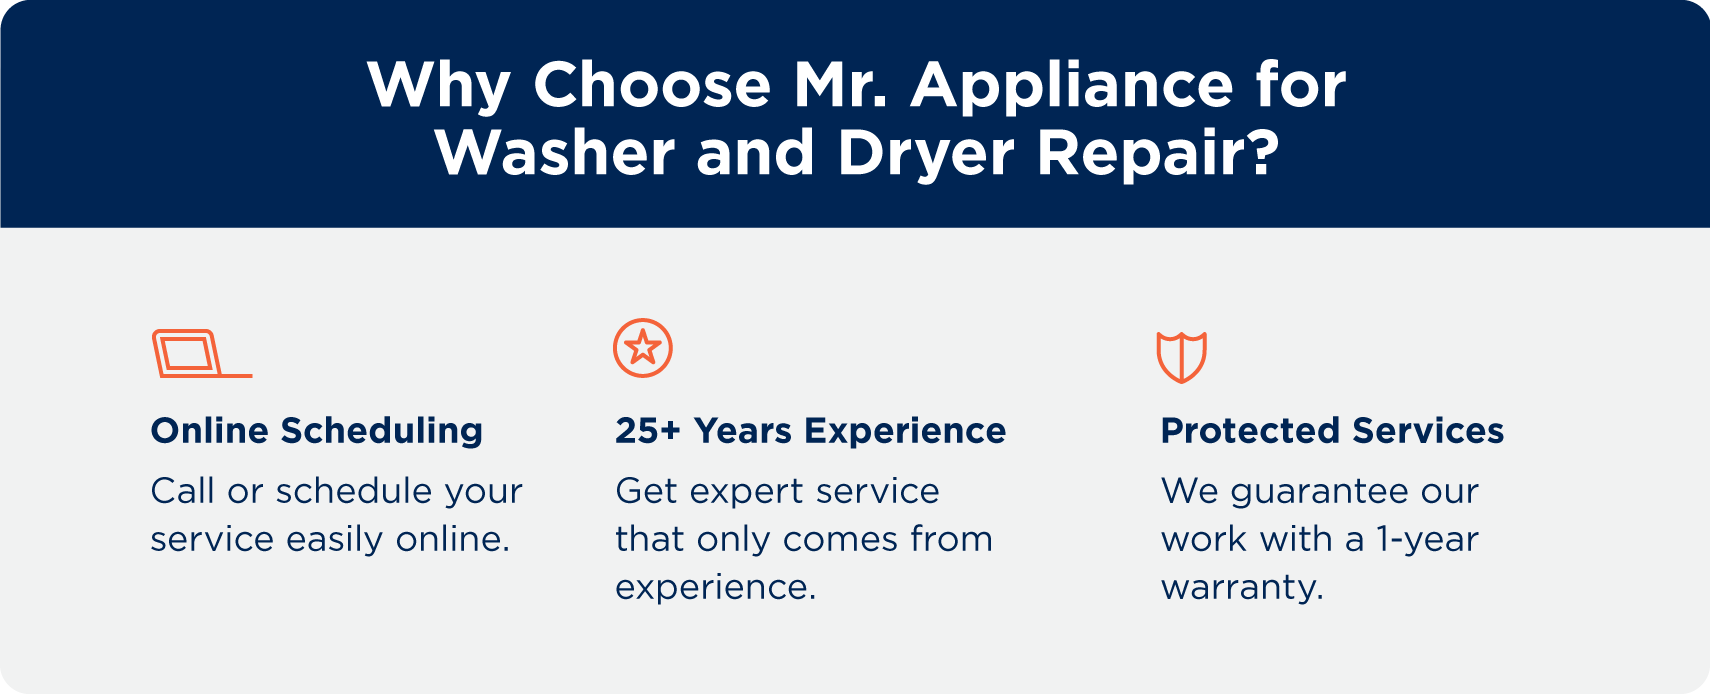 The reasons to choose Mr. Appliance for washer and dryer repair: online scheduling, 25+ years of experience, and protected services